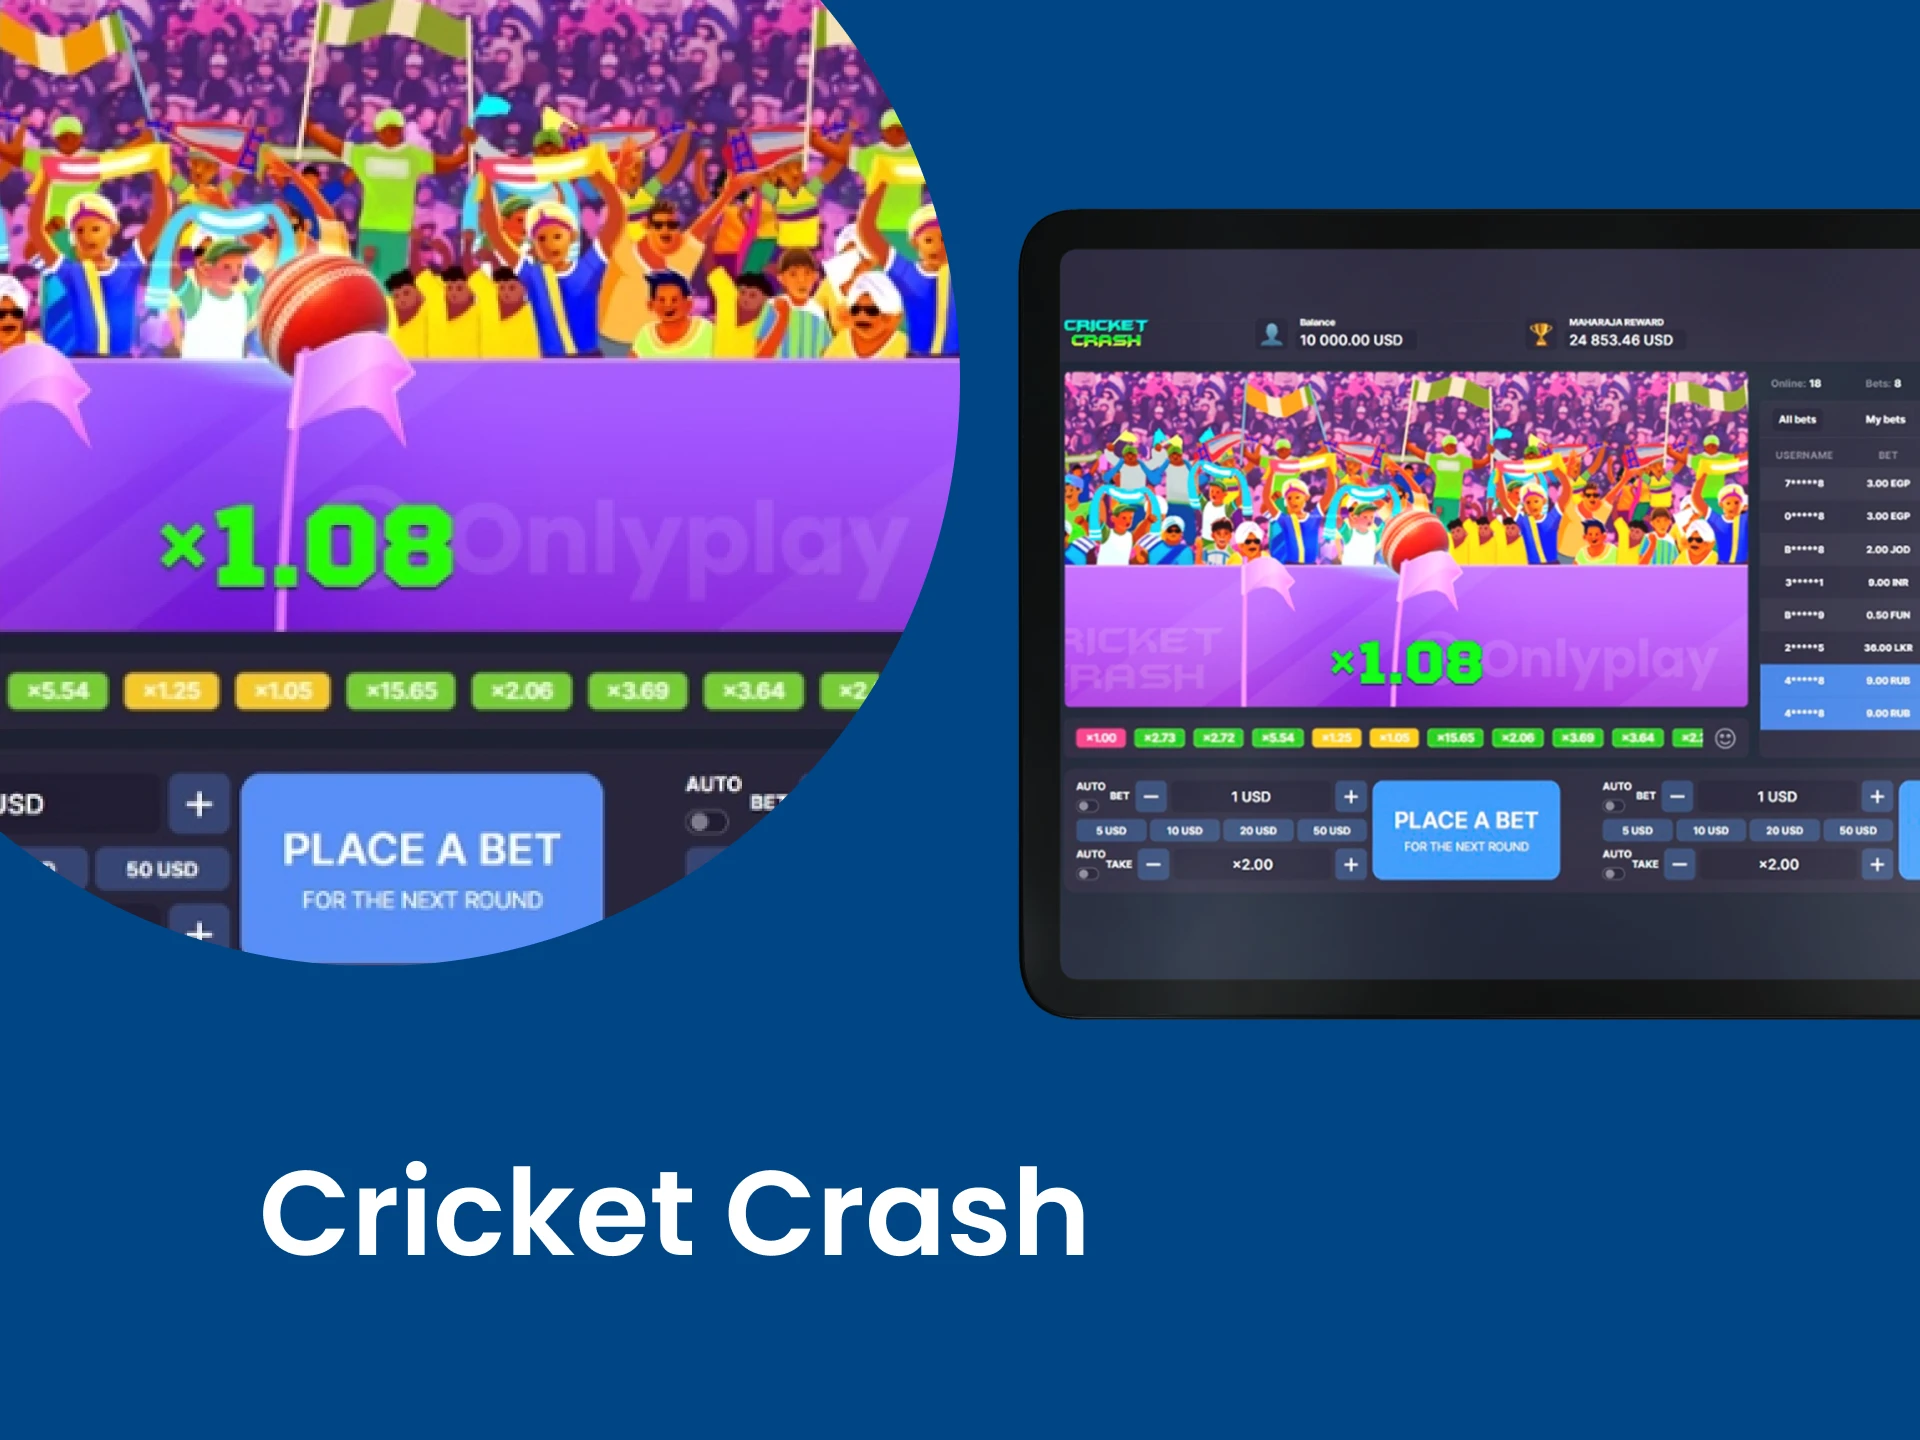 For gaming on your iPad, choose Cricket Cash.